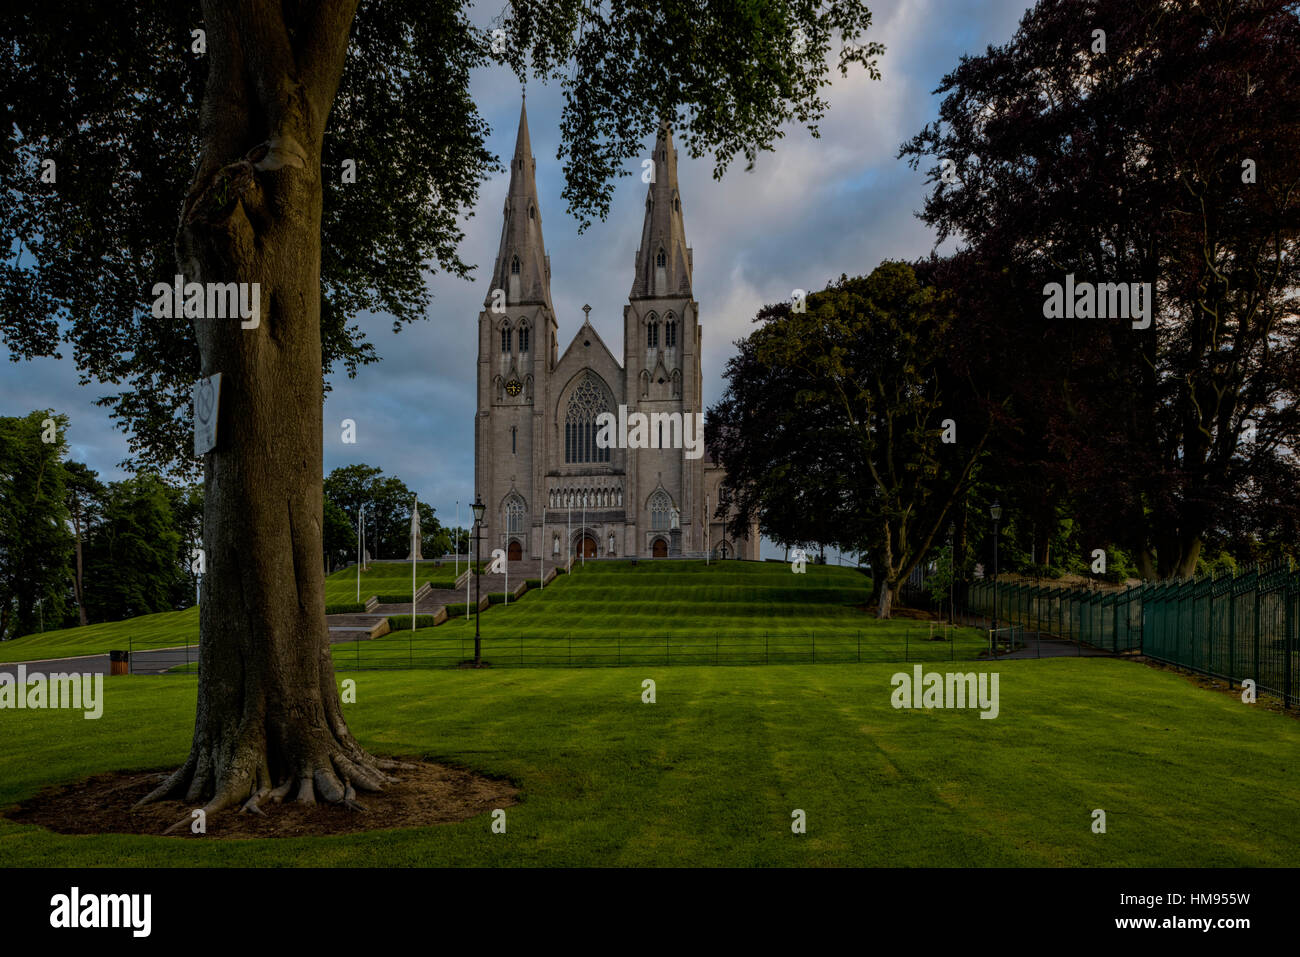 St. Patrick's Cathedral, Armagh, County Armagh, Ulster, Northern Ireland, United Kingdom Stock Photo